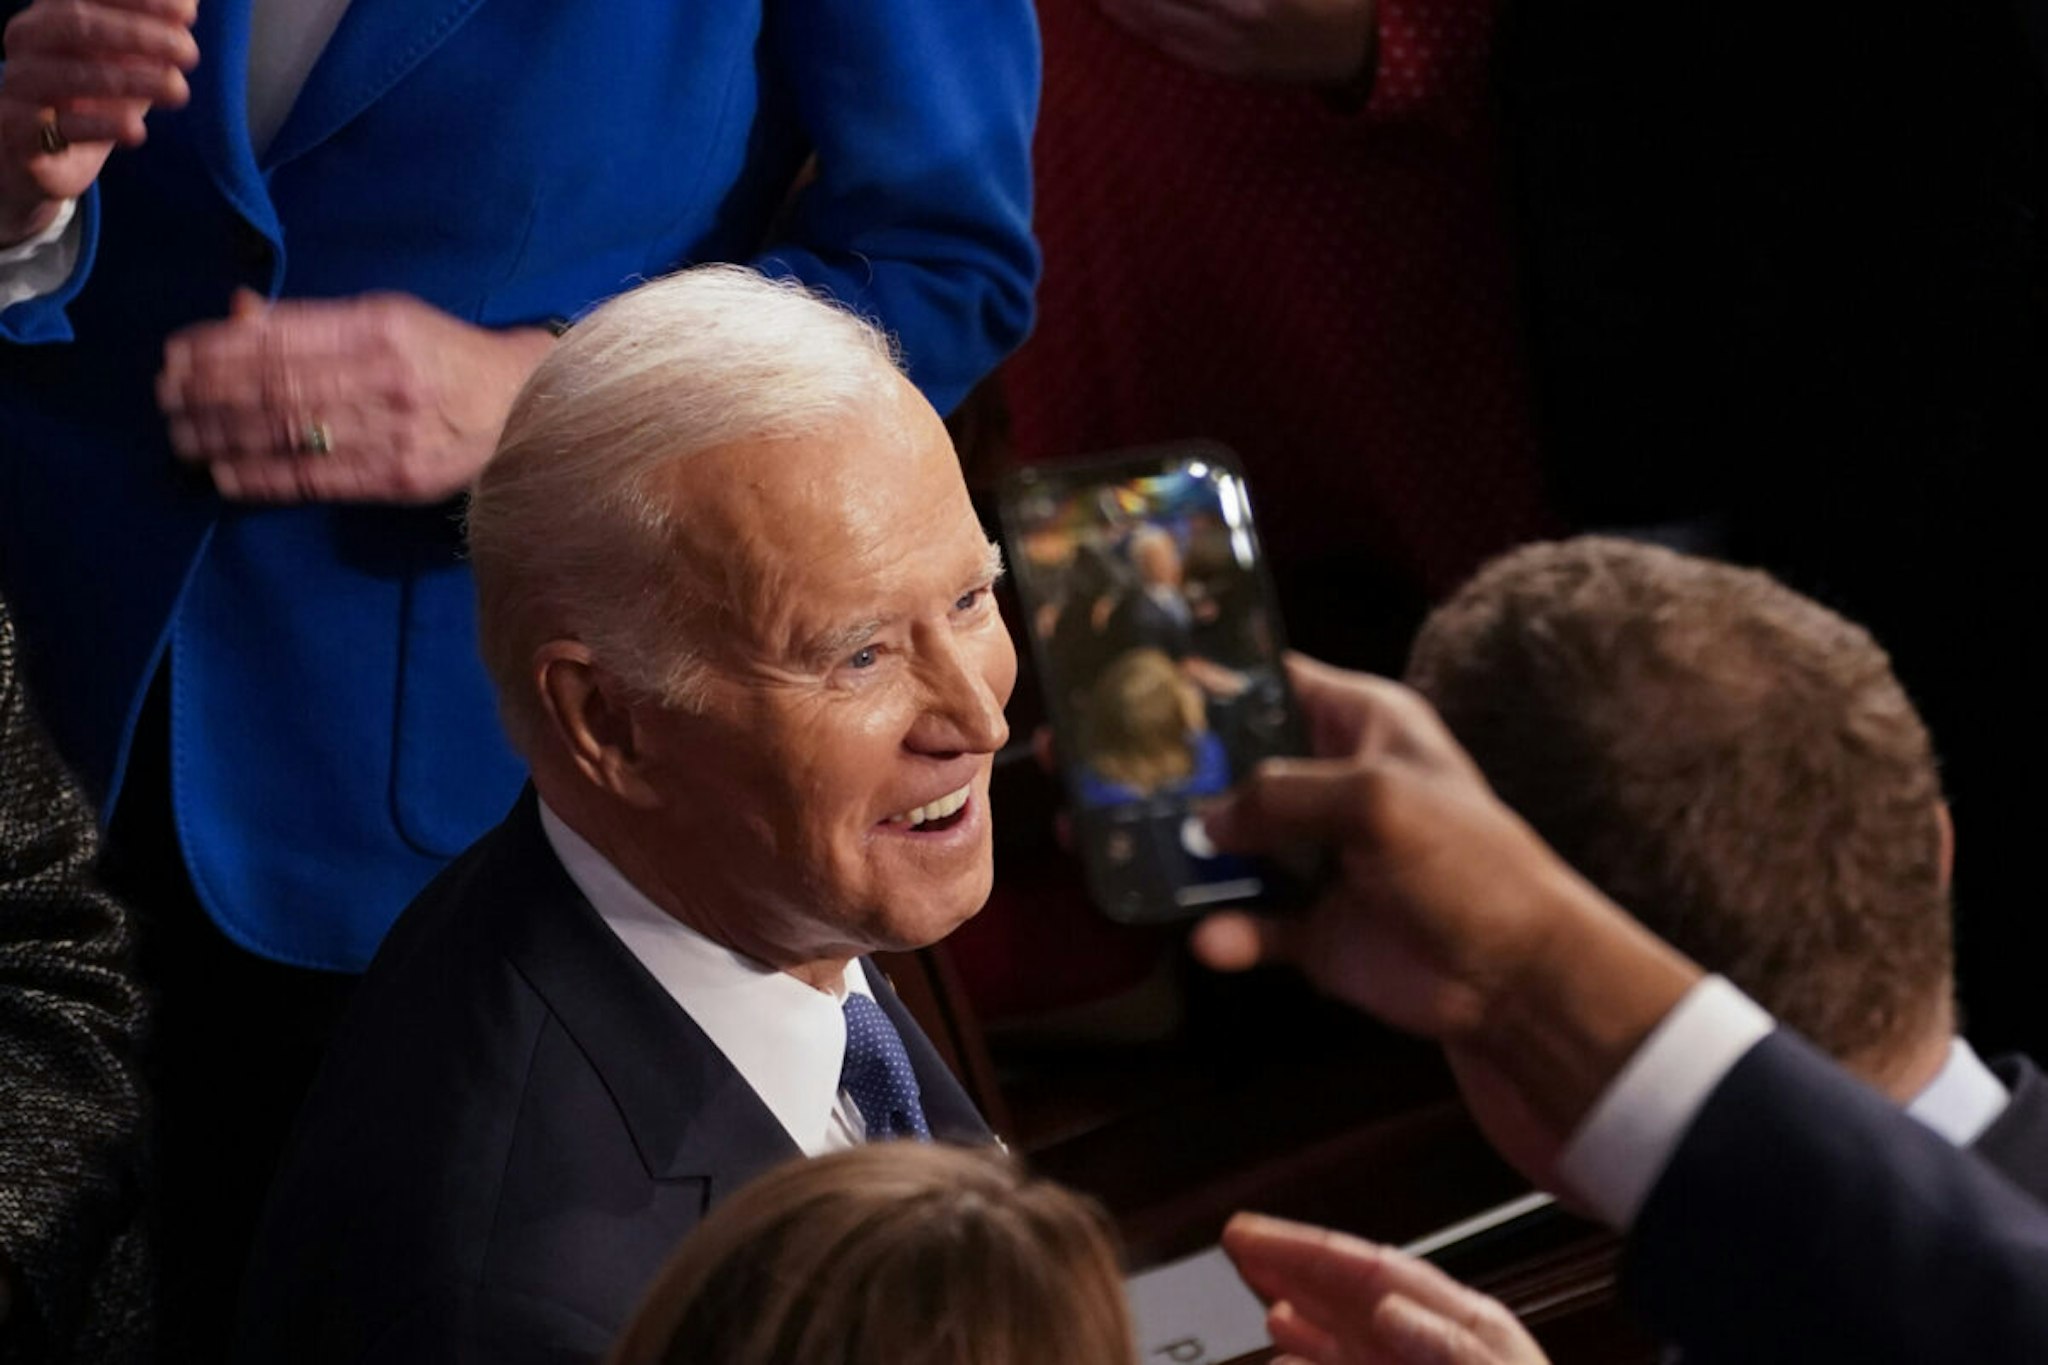 US President Joe Biden arrives to deliver the State of the Union address at the US Capitol in Washington, DC, US, on Tuesday, Feb. 7, 2023.